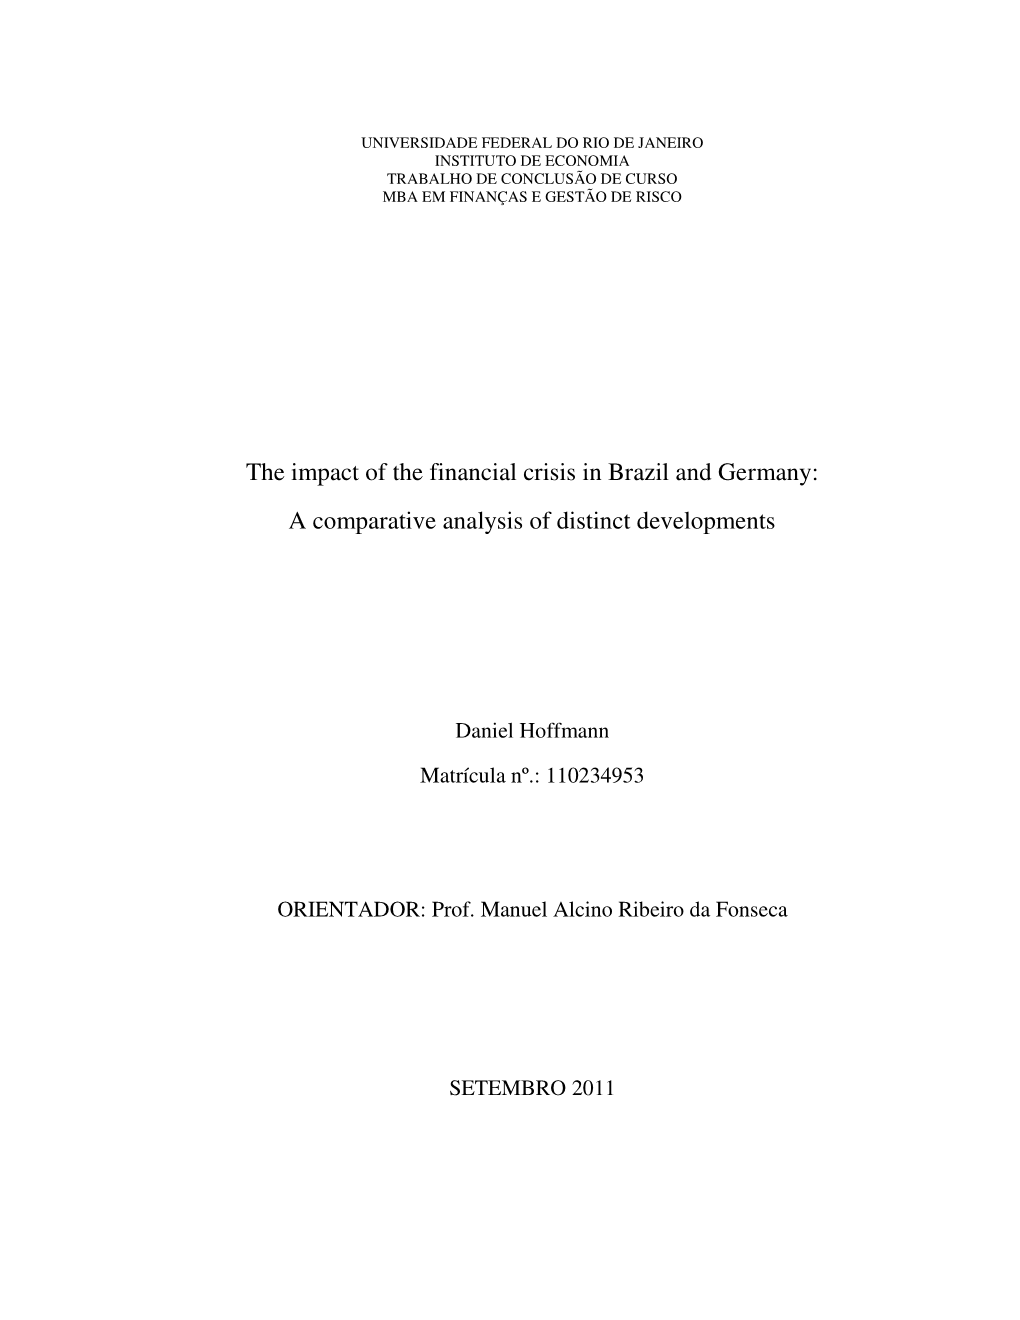 The Impact of the Financial Crisis in Brazil and Germany: a Comparative Analysis of Distinct Developments